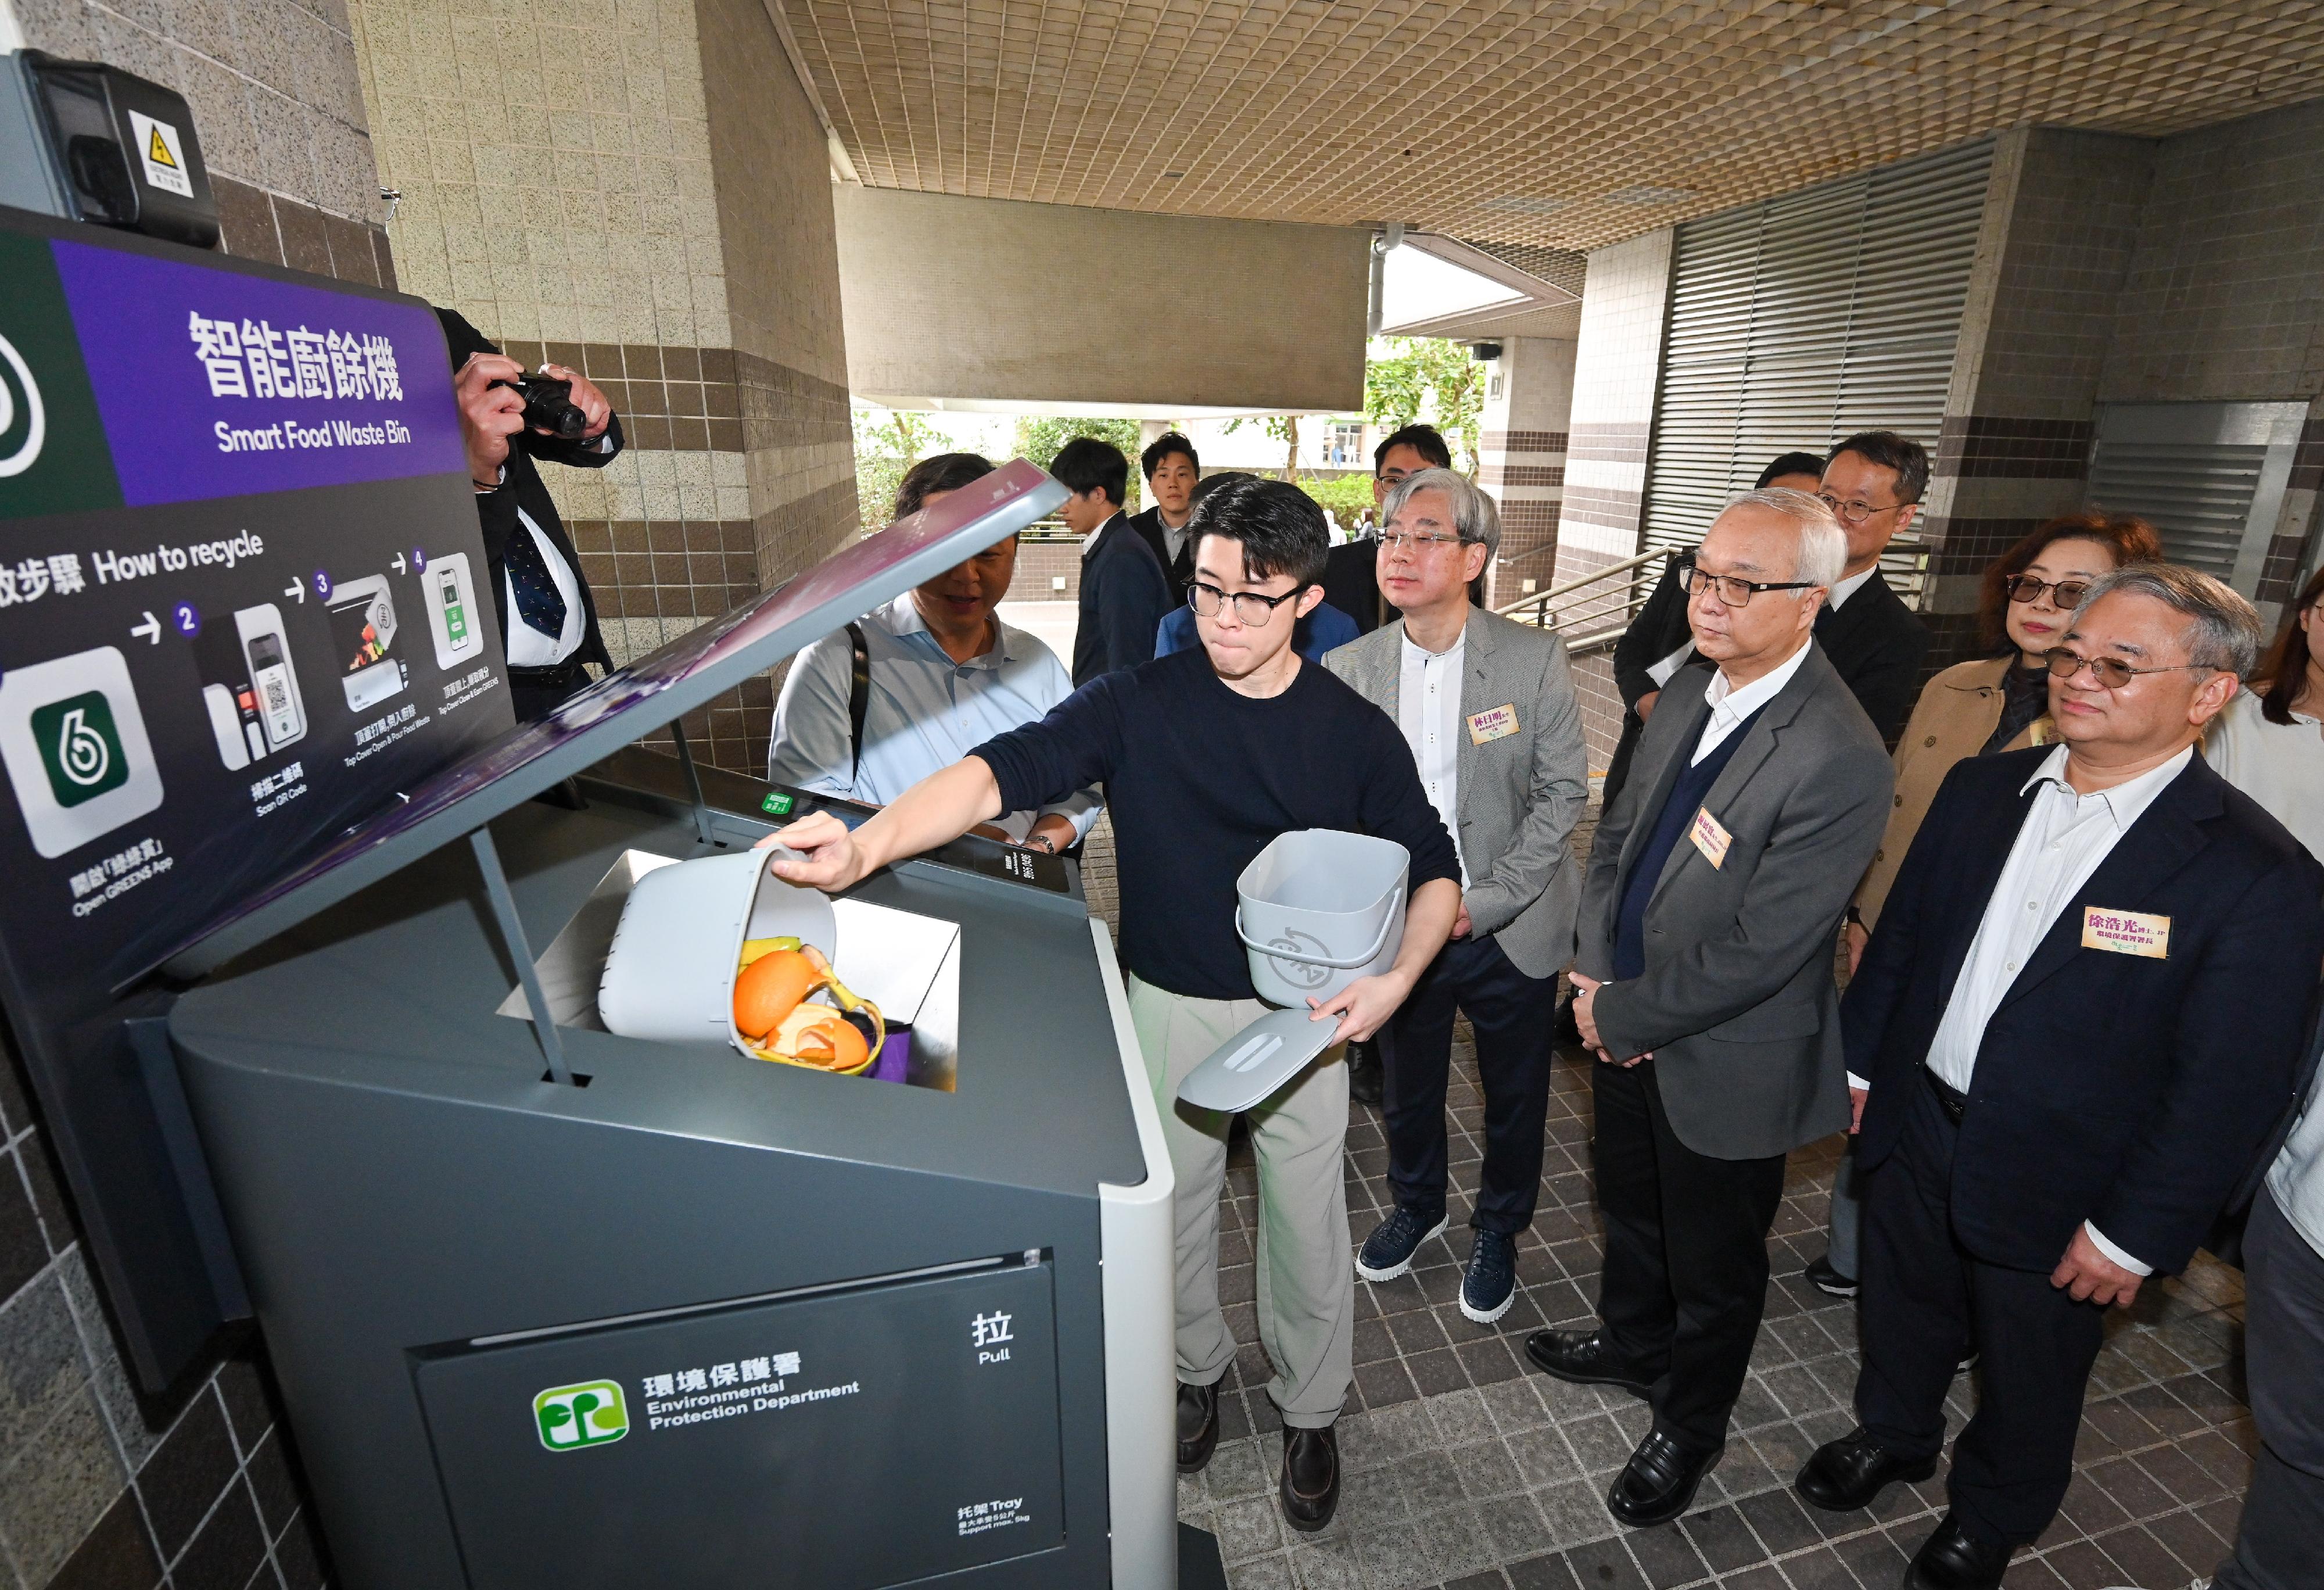 The Secretary for Environment and Ecology, Mr Tse Chin-wan, attended the launch ceremony of the Pilot Scheme on Food Waste Smart Recycling Bins in Private Housing Estates at Sceneway Garden in Lam Tin today (March 14), witnessing the introduction of the first batch of food waste smart recycling bins into large-scale private housing estates. Photo shows Mr Tse (second right); the Director of Environmental Protection, Dr Samuel Chui (first right); and the Chairman of the Estate Owners' Committee of Sceneway Garden, Mr Joe Lam (third right), watching a demonstration of using the Food Waste Smart Recycling Bin.